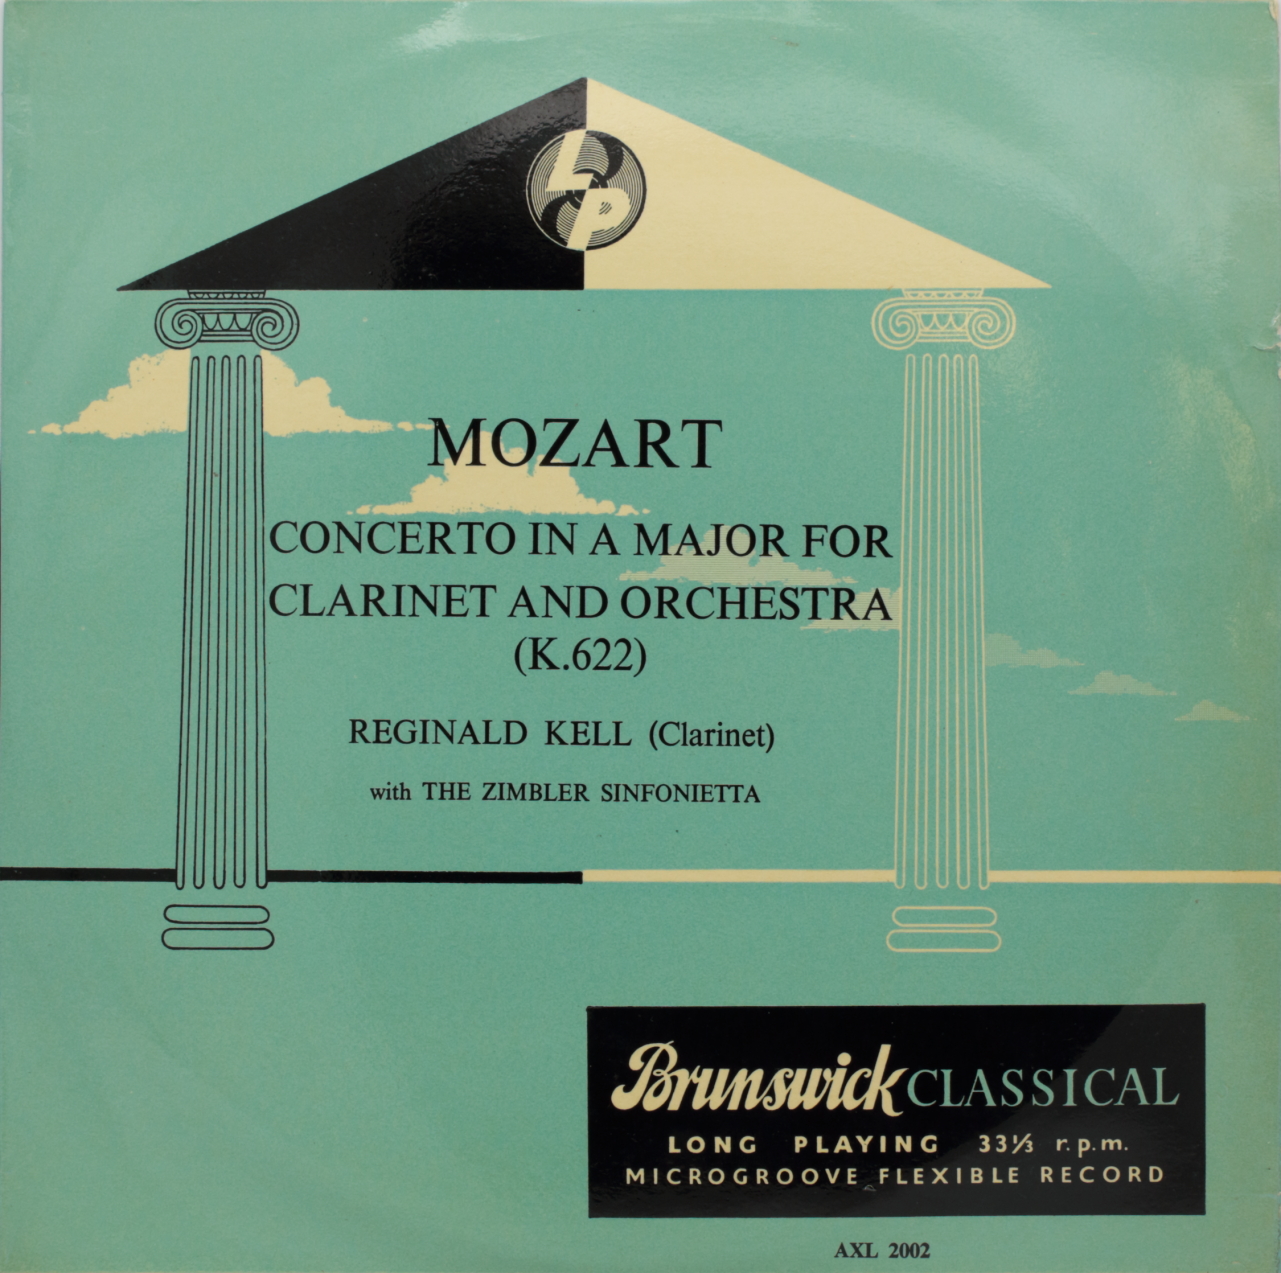 Mozart: Concerto in A major for Clarinet and Orchestra